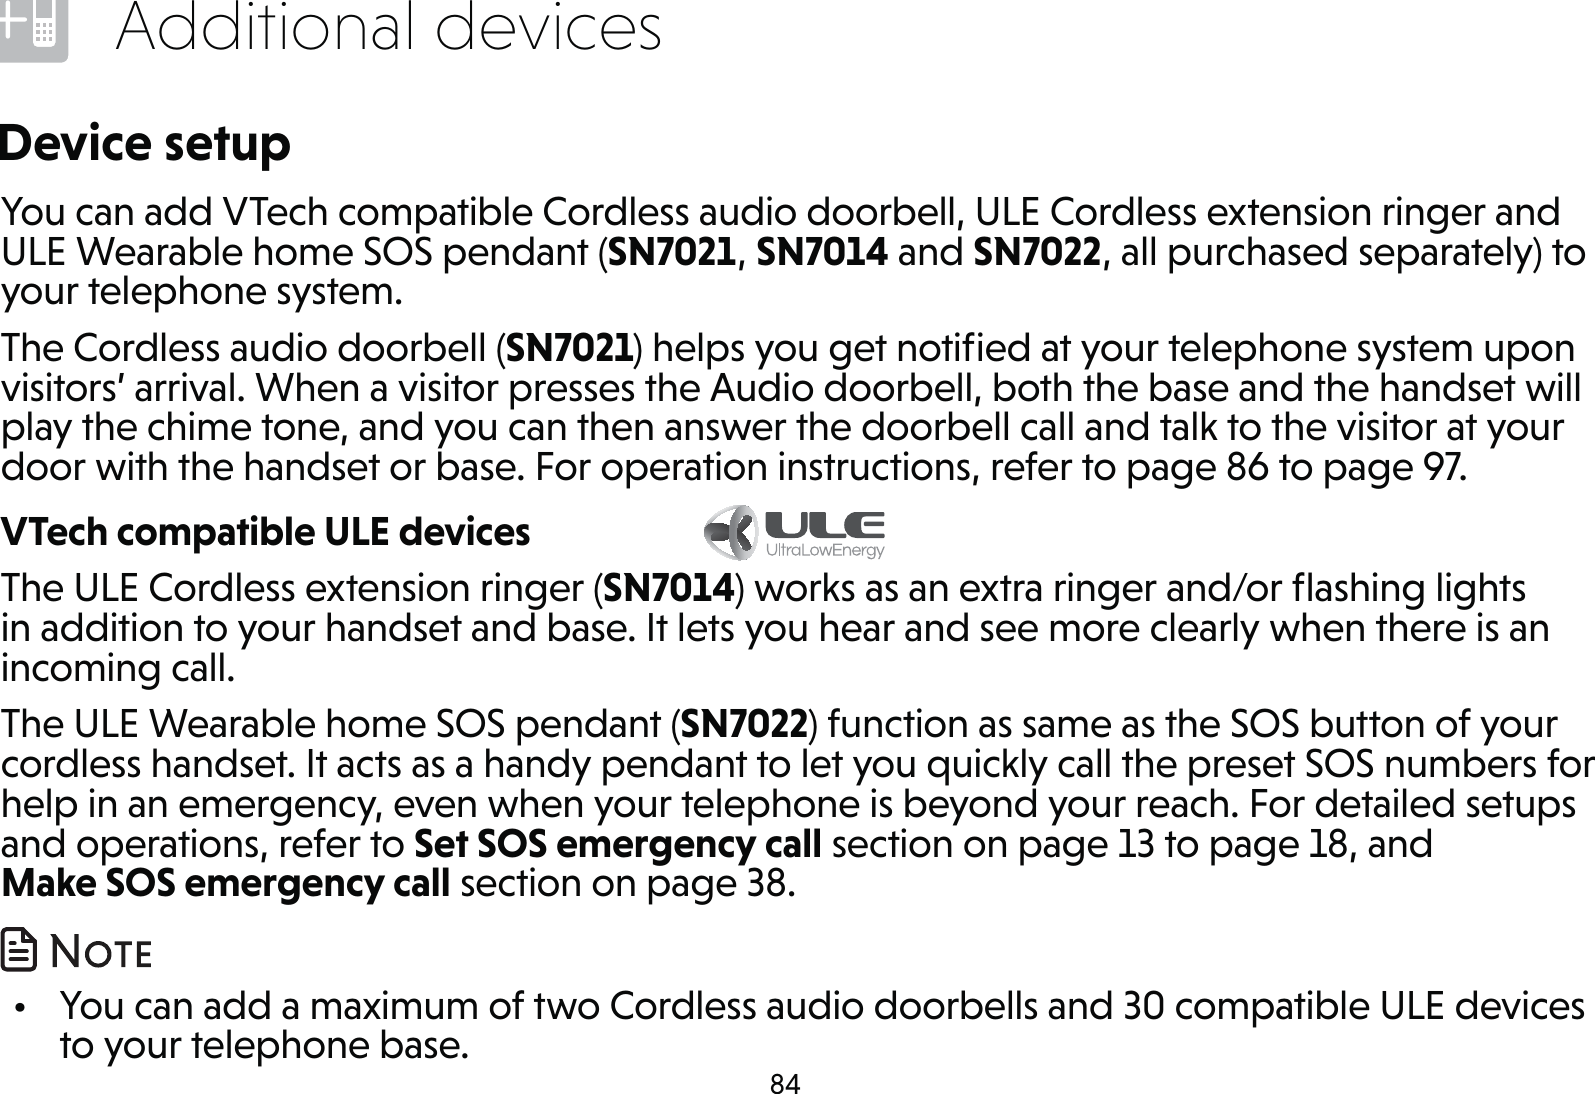 84Additional devicesDevice setupYou can add VTech compatible Cordless audio doorbell, ULE Cordless extension ringer and ULE Wearable home SOS pendant (SN7021, SN7014 and SN7022, all purchased separately) to your telephone system.The Cordless audio doorbell (SN7021) helps you get notiﬁed at your telephone system upon visitors’ arrival. When a visitor presses the Audio doorbell, both the base and the handset will play the chime tone, and you can then answer the doorbell call and talk to the visitor at your door with the handset or base. For operation instructions, refer to page 86 to page 97.VTech compatible ULE devices           The ULE Cordless extension ringer (SN7014) works as an extra ringer and/or ﬂashing lights in addition to your handset and base. It lets you hear and see more clearly when there is an incoming call.The ULE Wearable home SOS pendant (SN7022) function as same as the SOS button of your cordless handset. It acts as a handy pendant to let you quickly call the preset SOS numbers for help in an emergency, even when your telephone is beyond your reach. For detailed setups and operations, refer to Set SOS emergency call section on page 13 to page 18, and Make SOS emergency call section on page 38.  •  You can add a maximum of two Cordless audio doorbells and 30 compatible ULE devices to your telephone base.